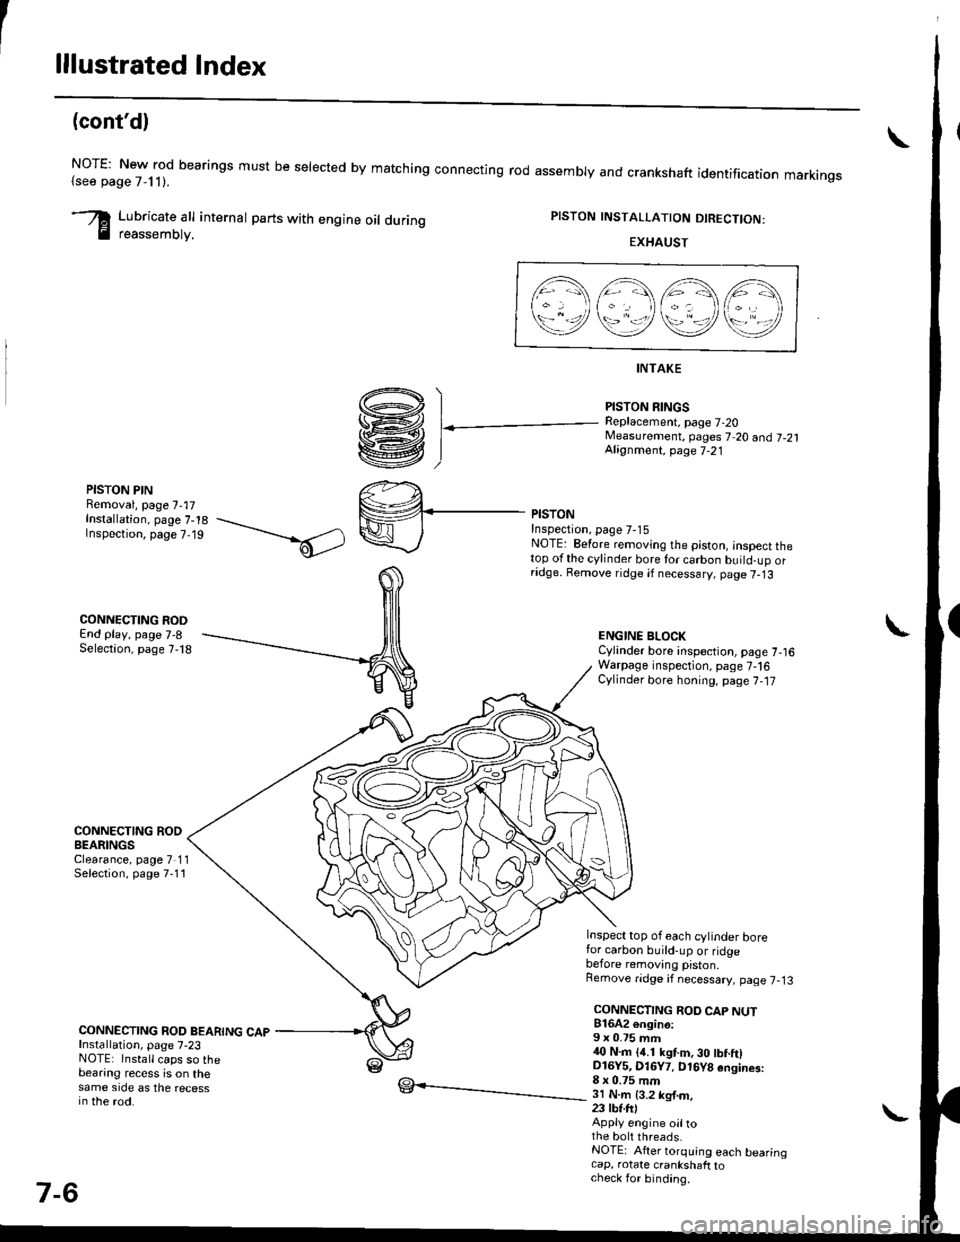 HONDA CIVIC 1996 6.G Owners Guide lllustrated Index
(contd)
NOTE: New rod bearings must be selected by matching connecting rod assembly and crankshaft(see page 7,11).identification markings
Lubricate all internal parts with engine oi